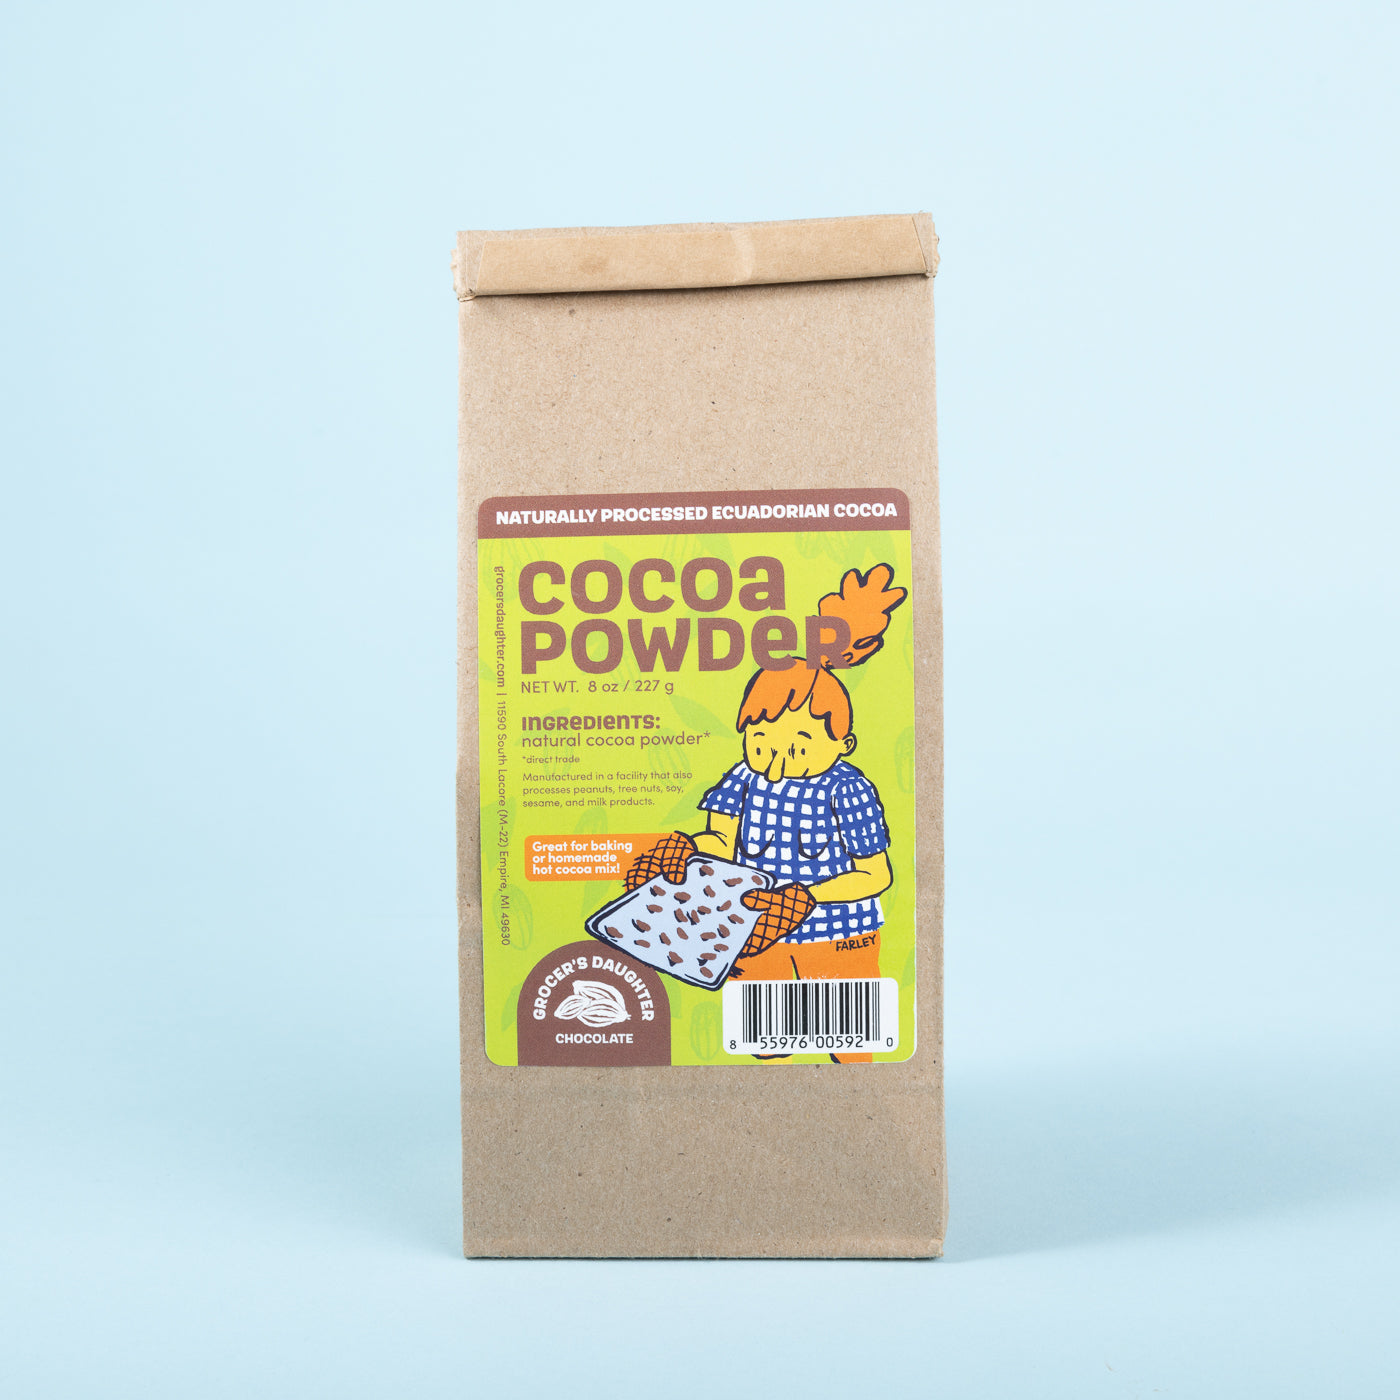 Cocoa powder bag with a blue background